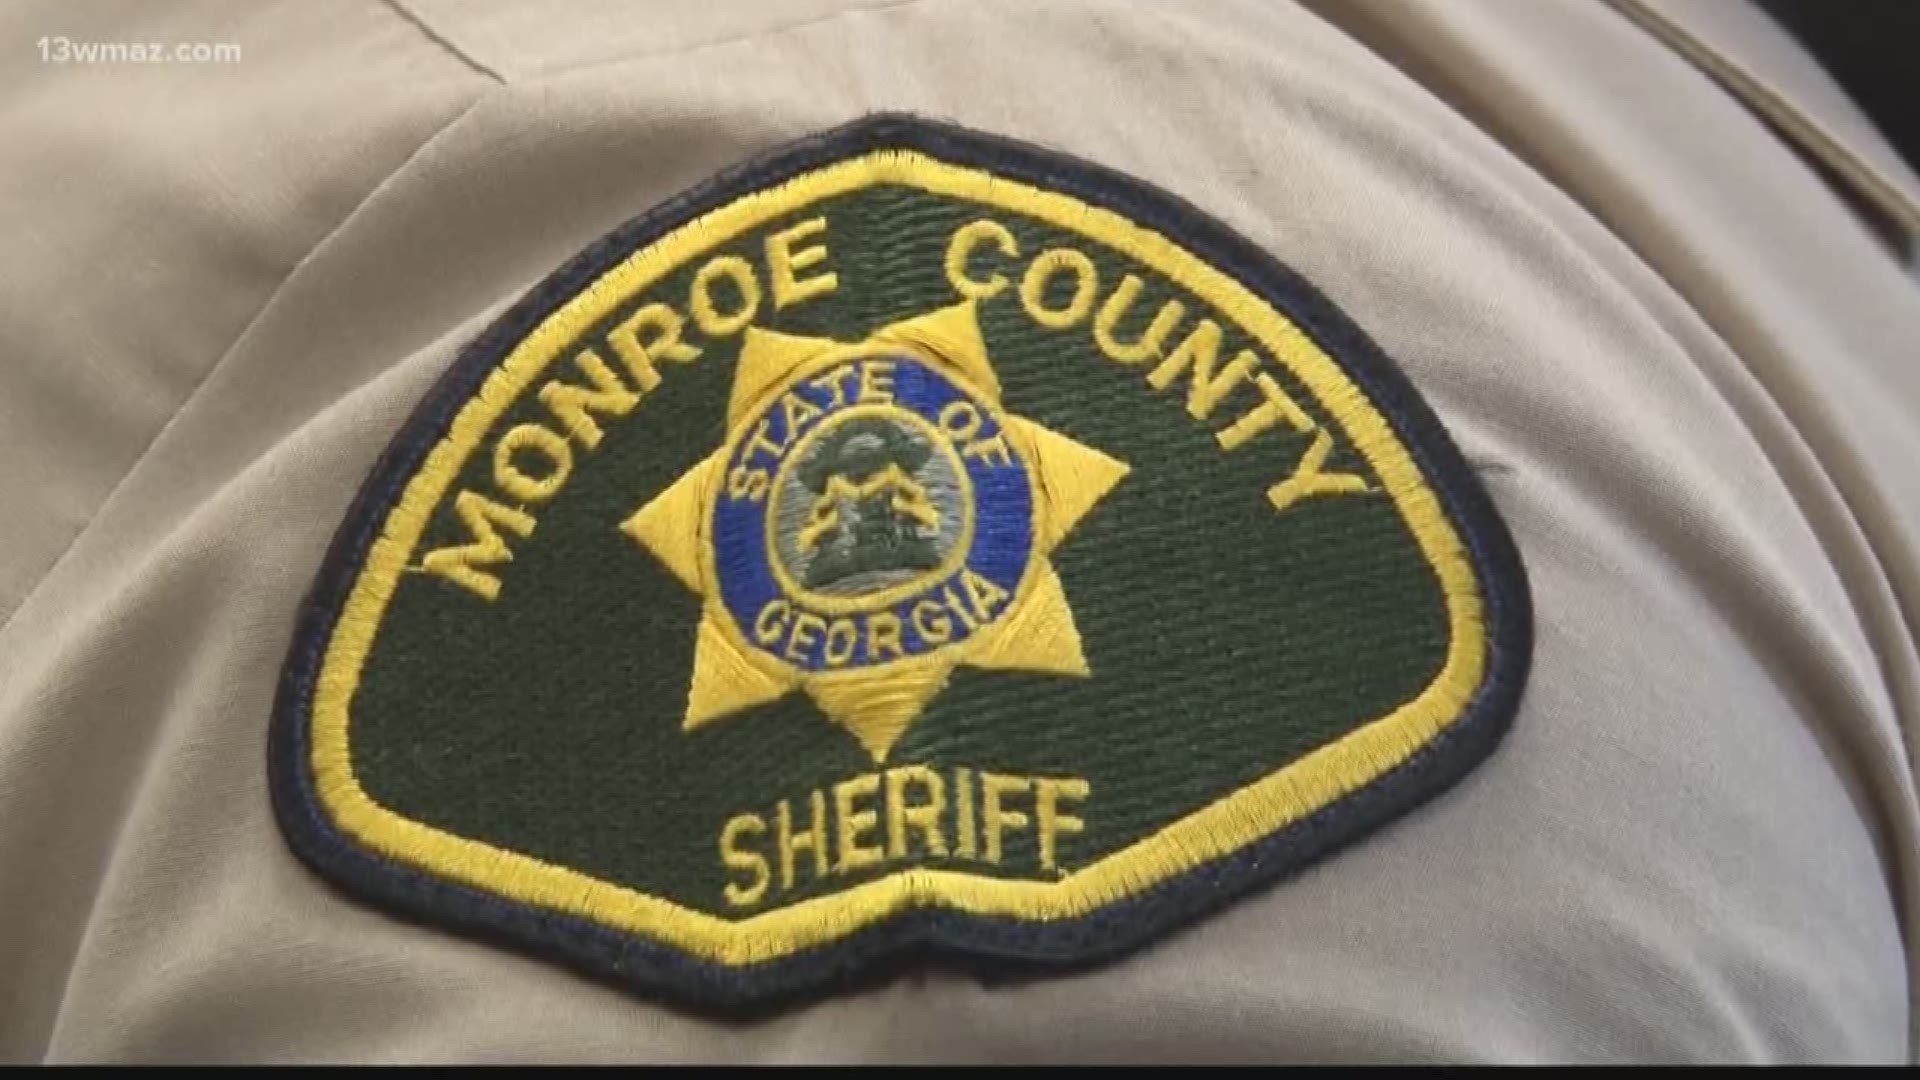 At the start of the new year Monroe County deputies will see a bump in their pay.